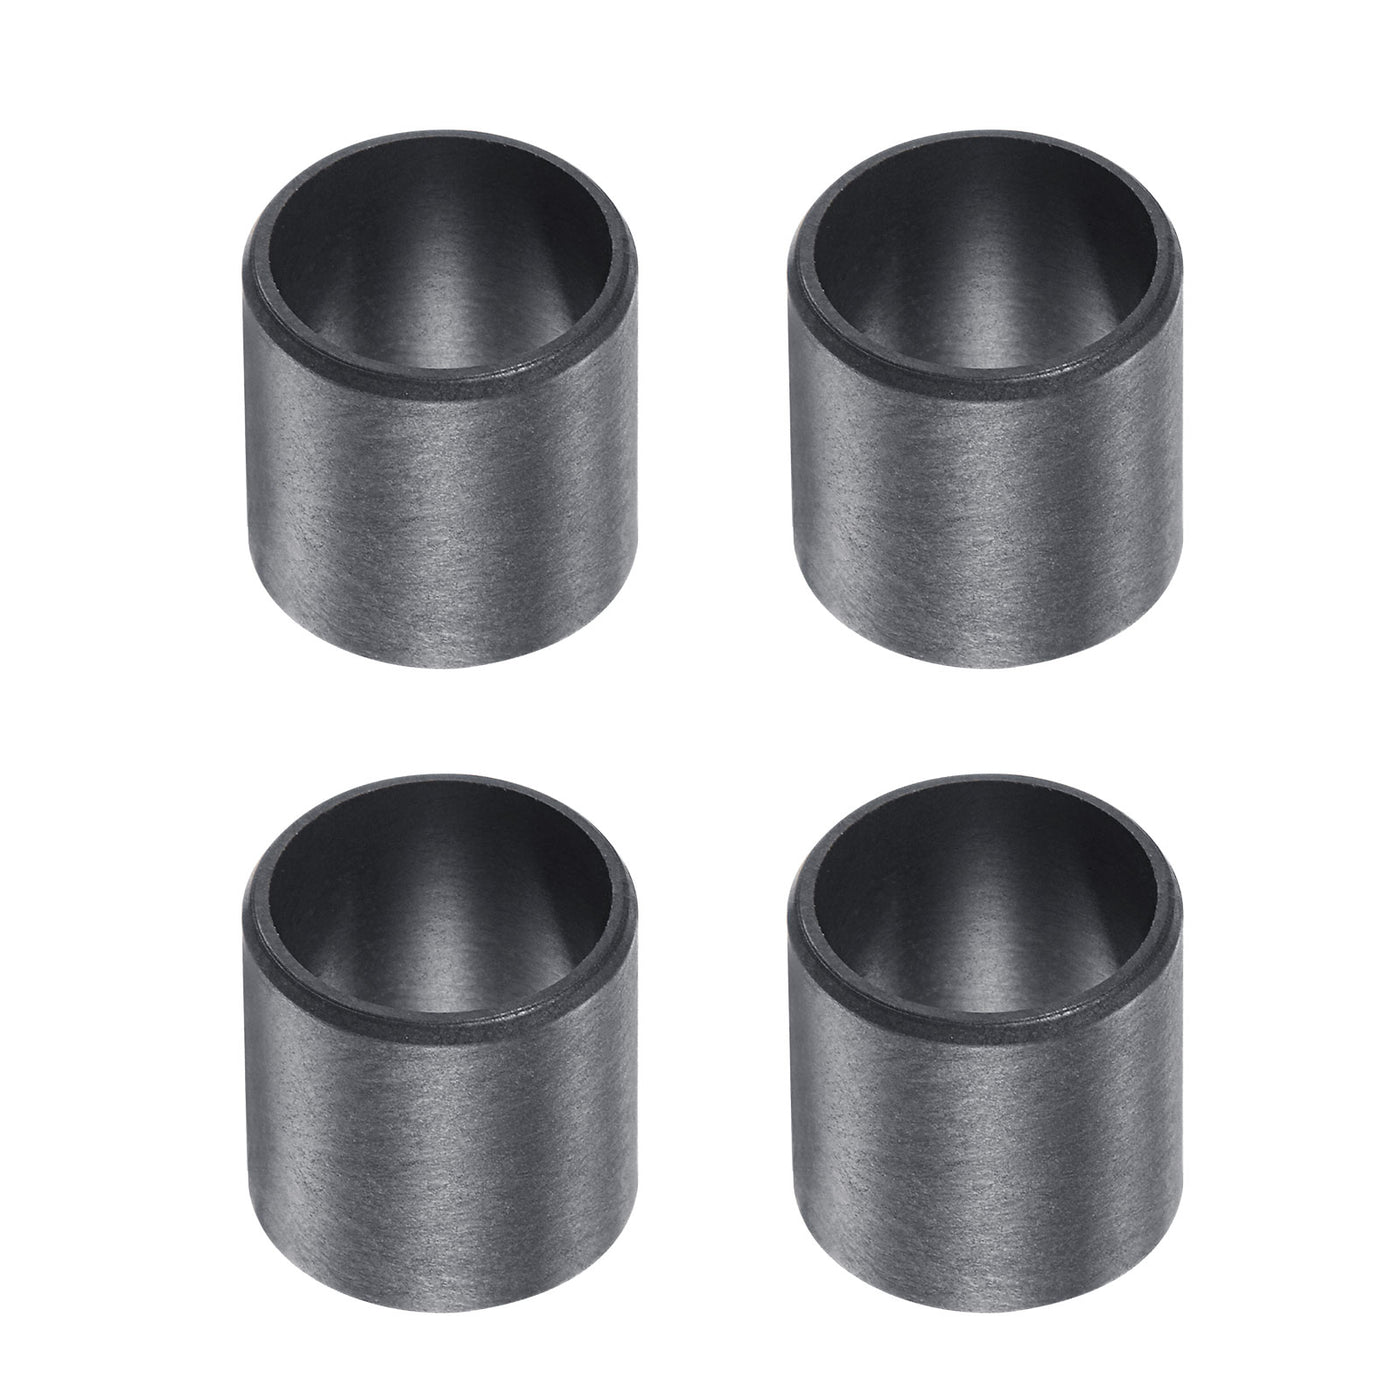 uxcell Uxcell Sleeve Bearings 12mmx14mmx12mm POM Wrapped Oilless Bushings Black 4pcs